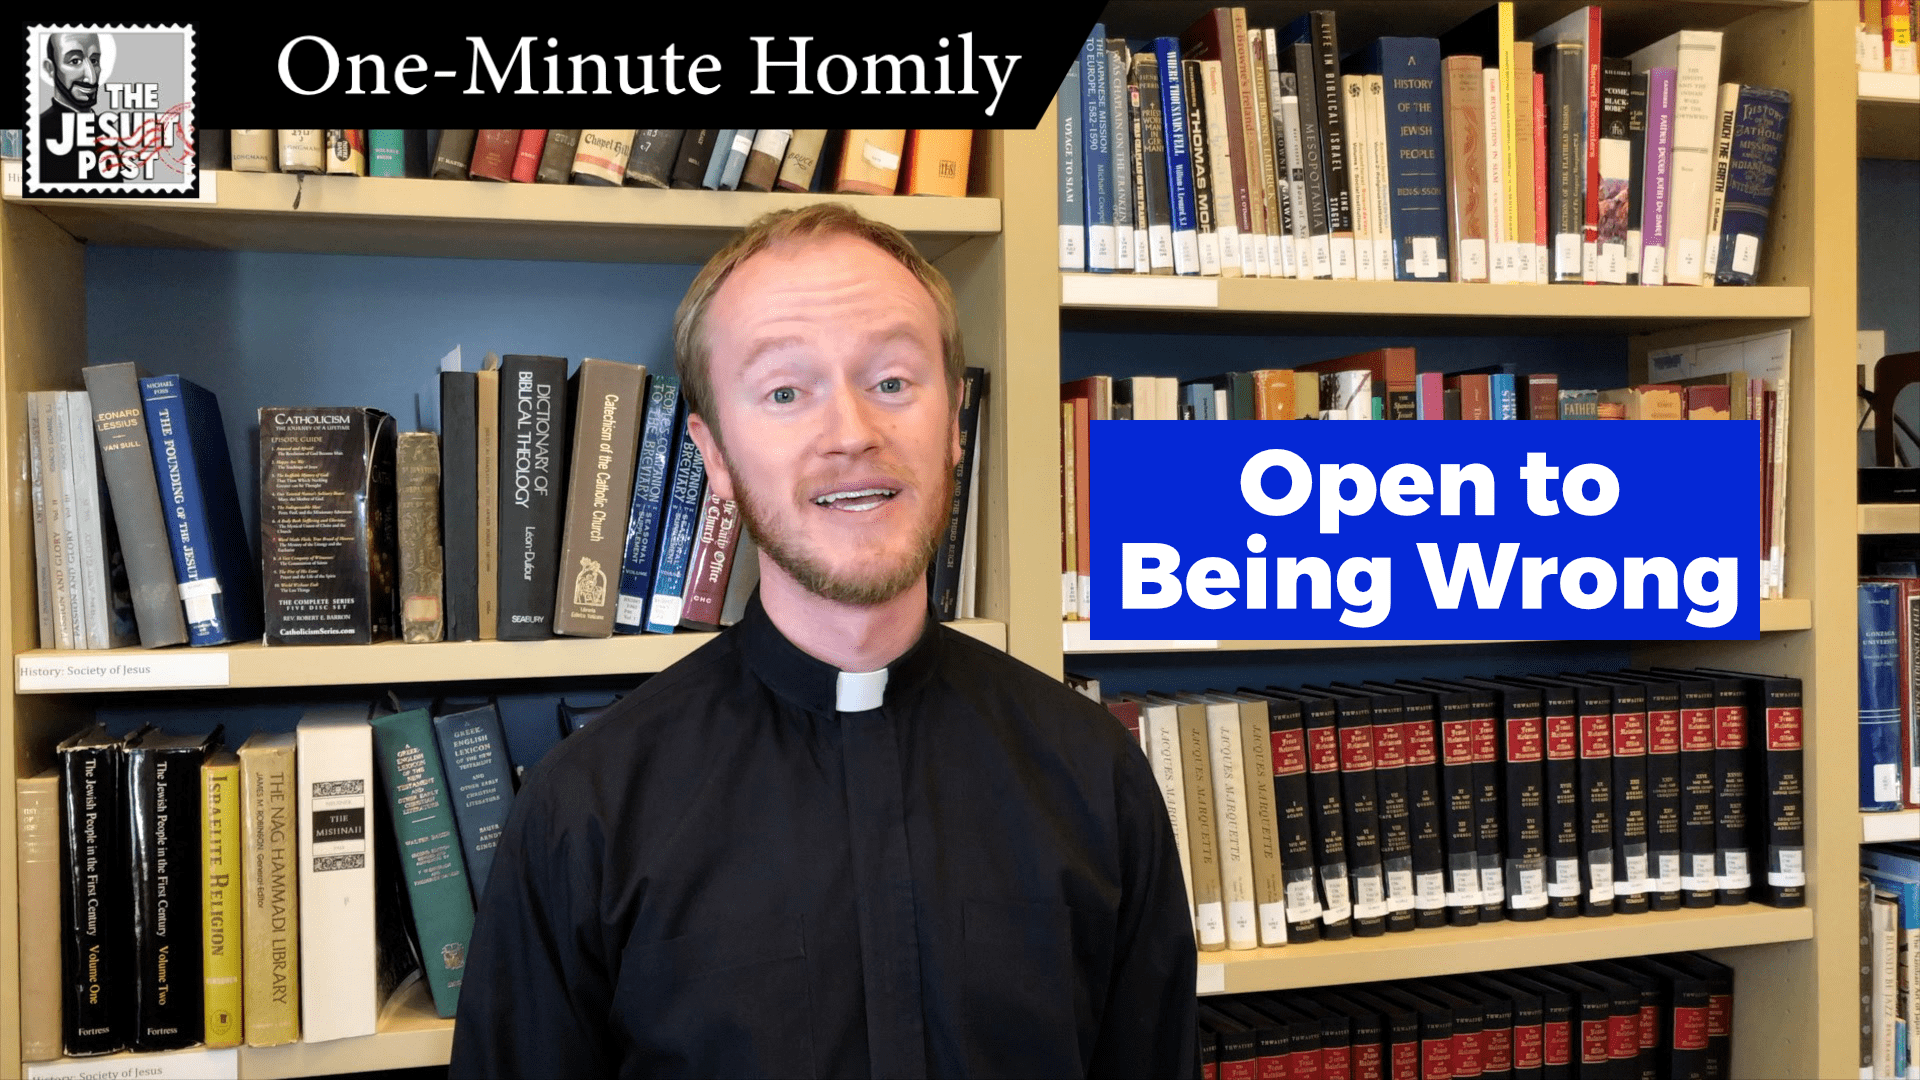 One-Minute Homily: “Open to Being Wrong”